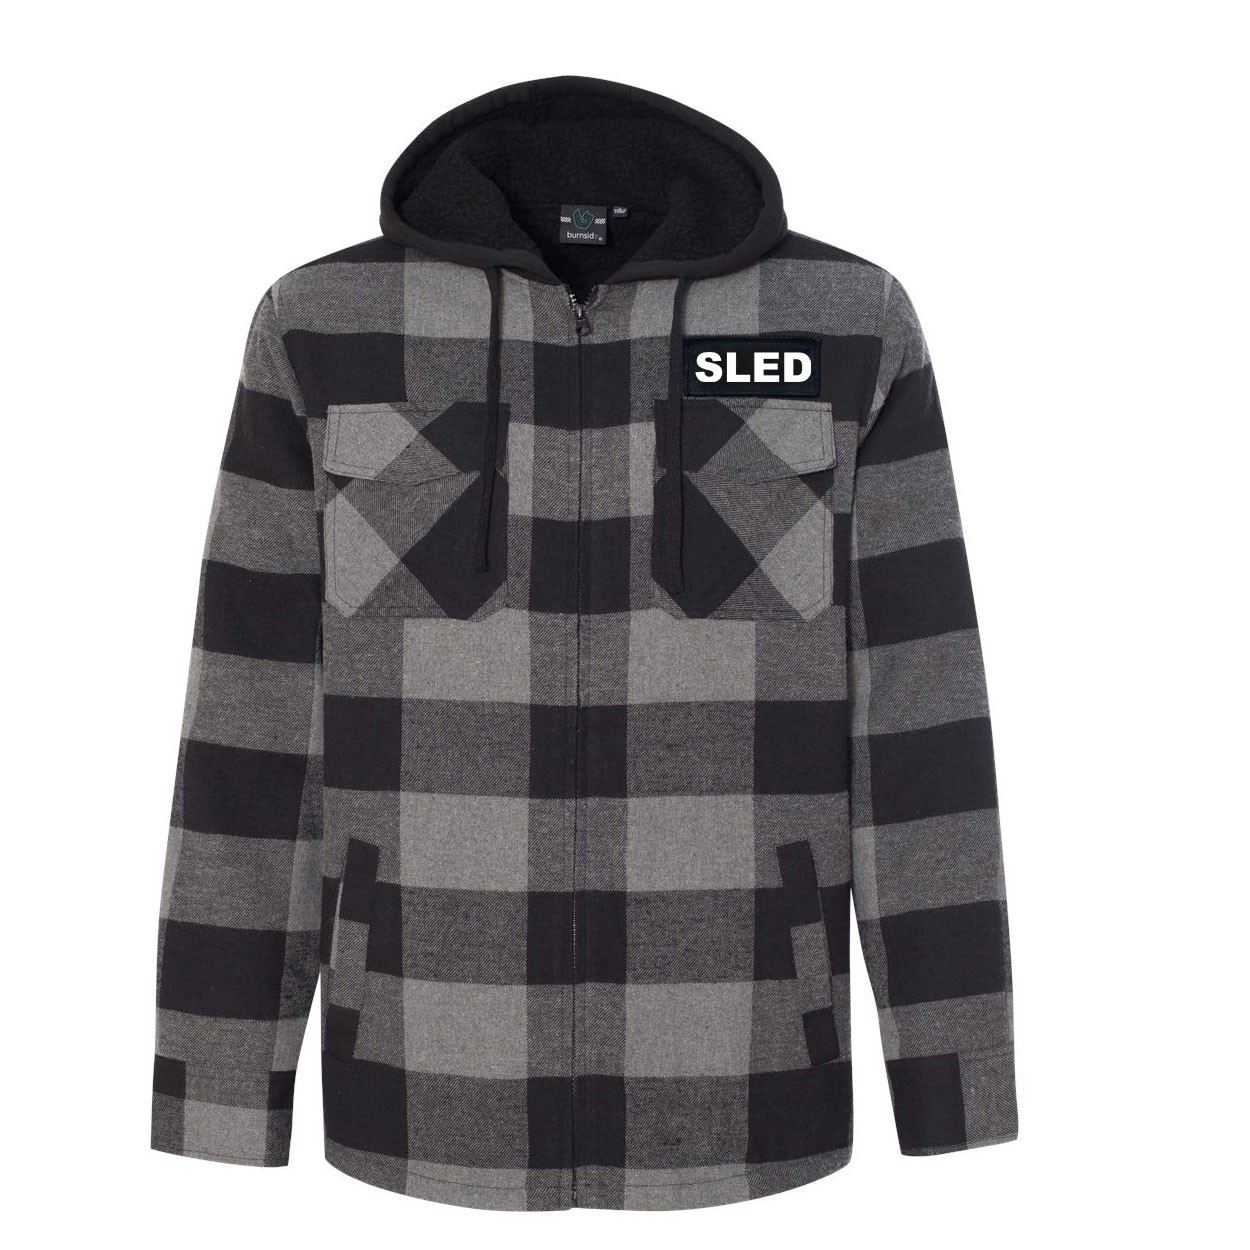 Sled Brand Logo Classic Unisex Full Zip Woven Patch Hooded Flannel Jacket Black/Gray